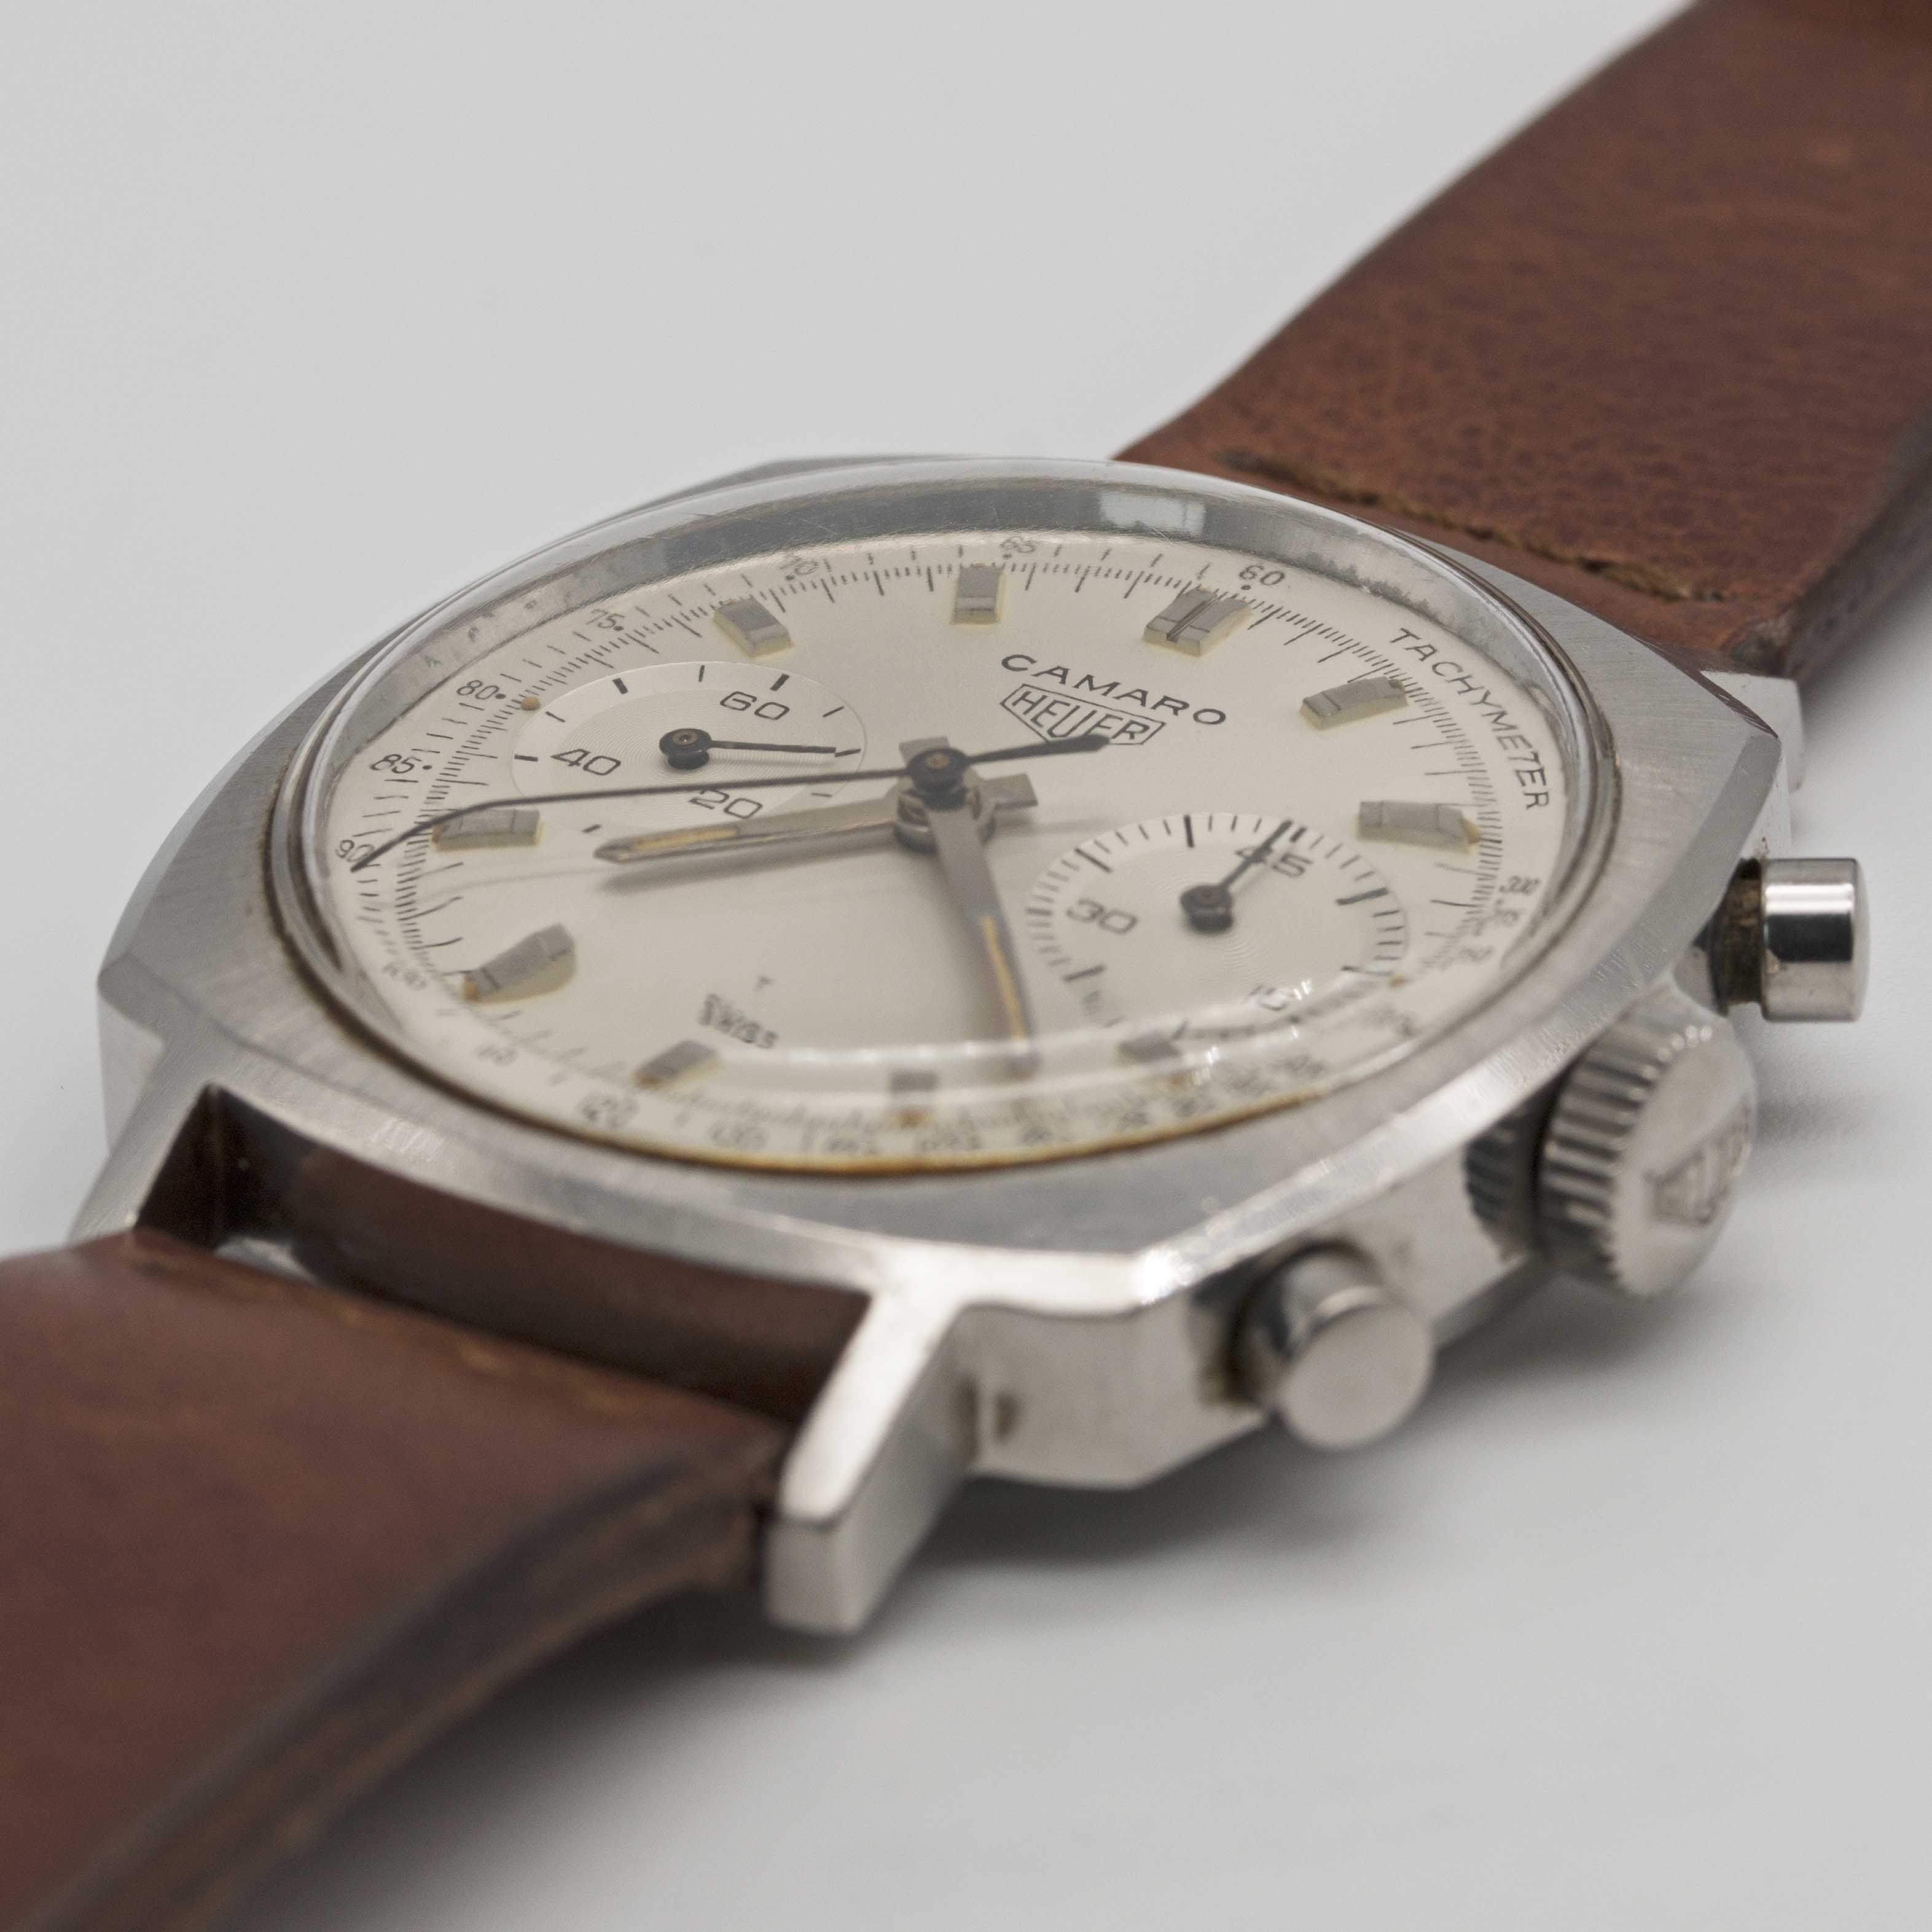 A GENTLEMAN'S STAINLESS STEEL HEUER CAMARO CHRONOGRAPH WRIST WATCH CIRCA 1970, REF. 9220T WITH - Image 3 of 9